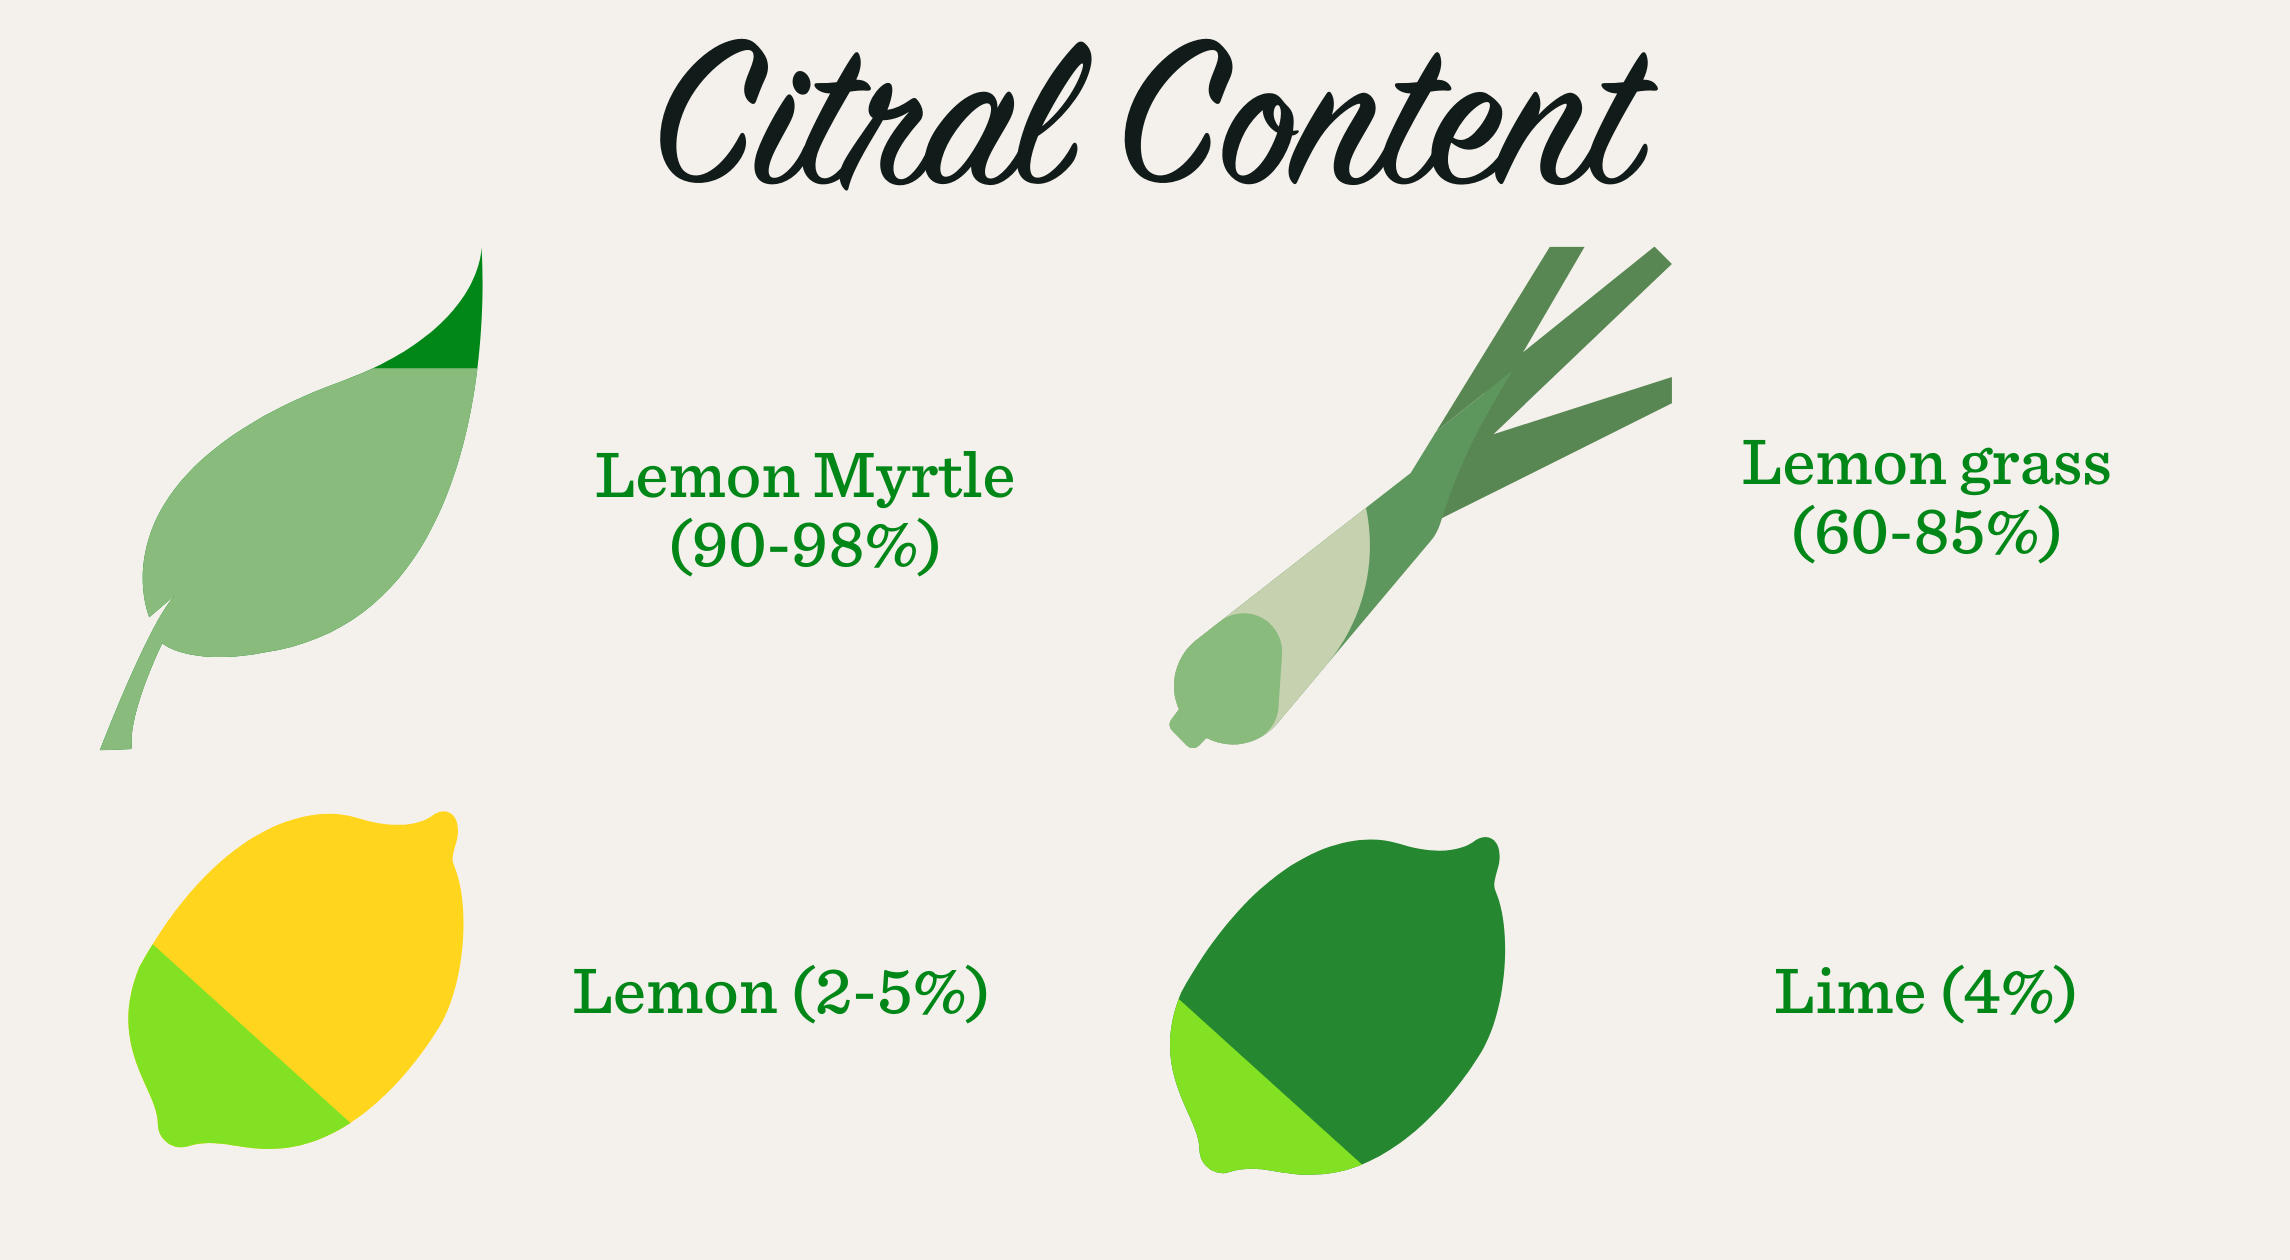 Lemon Myrtle is not a citrus plant at all. It belongs to the Myrtaceae family, which also includes well-known plants such as eucalyptus.